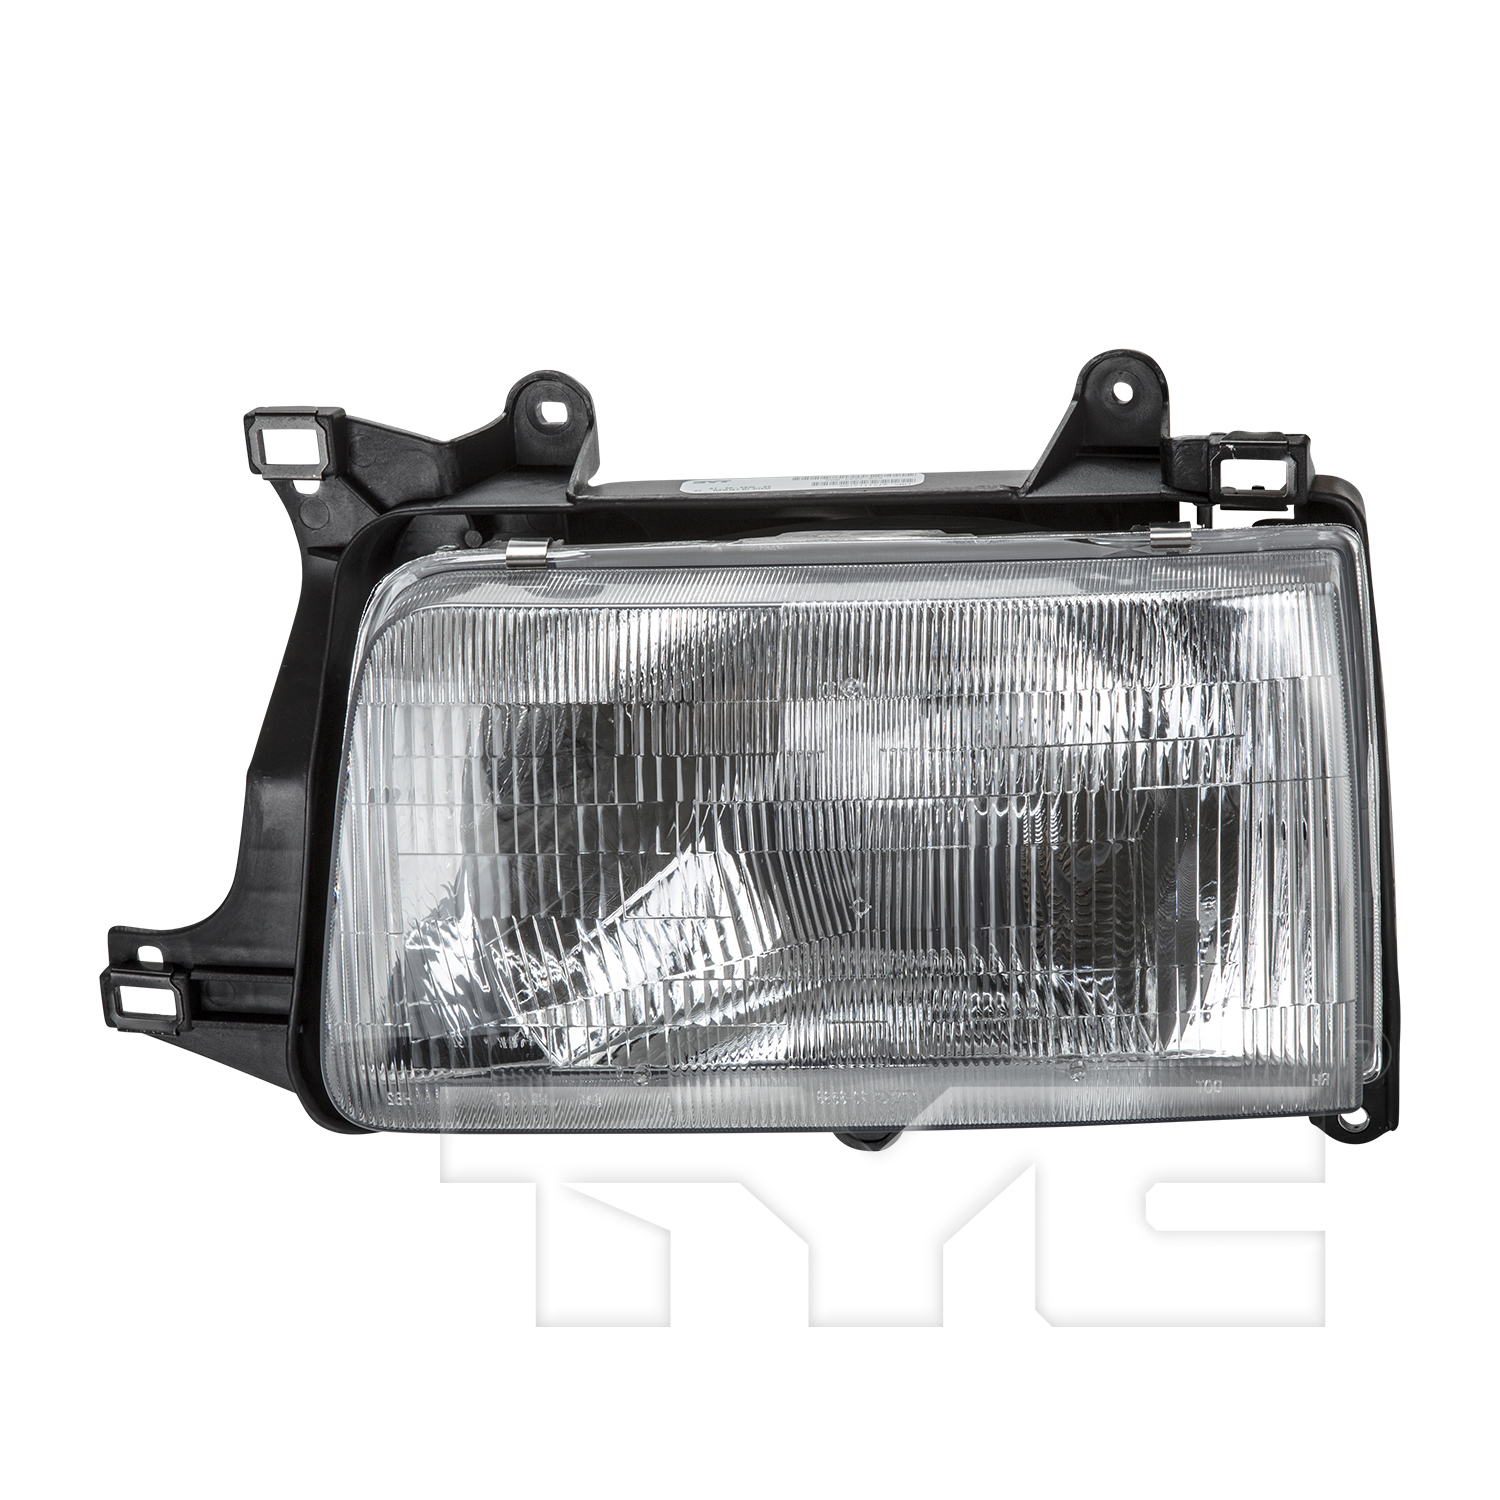 Aftermarket HEADLIGHTS for TOYOTA - T100, T100,93-98,LT Headlamp assy composite